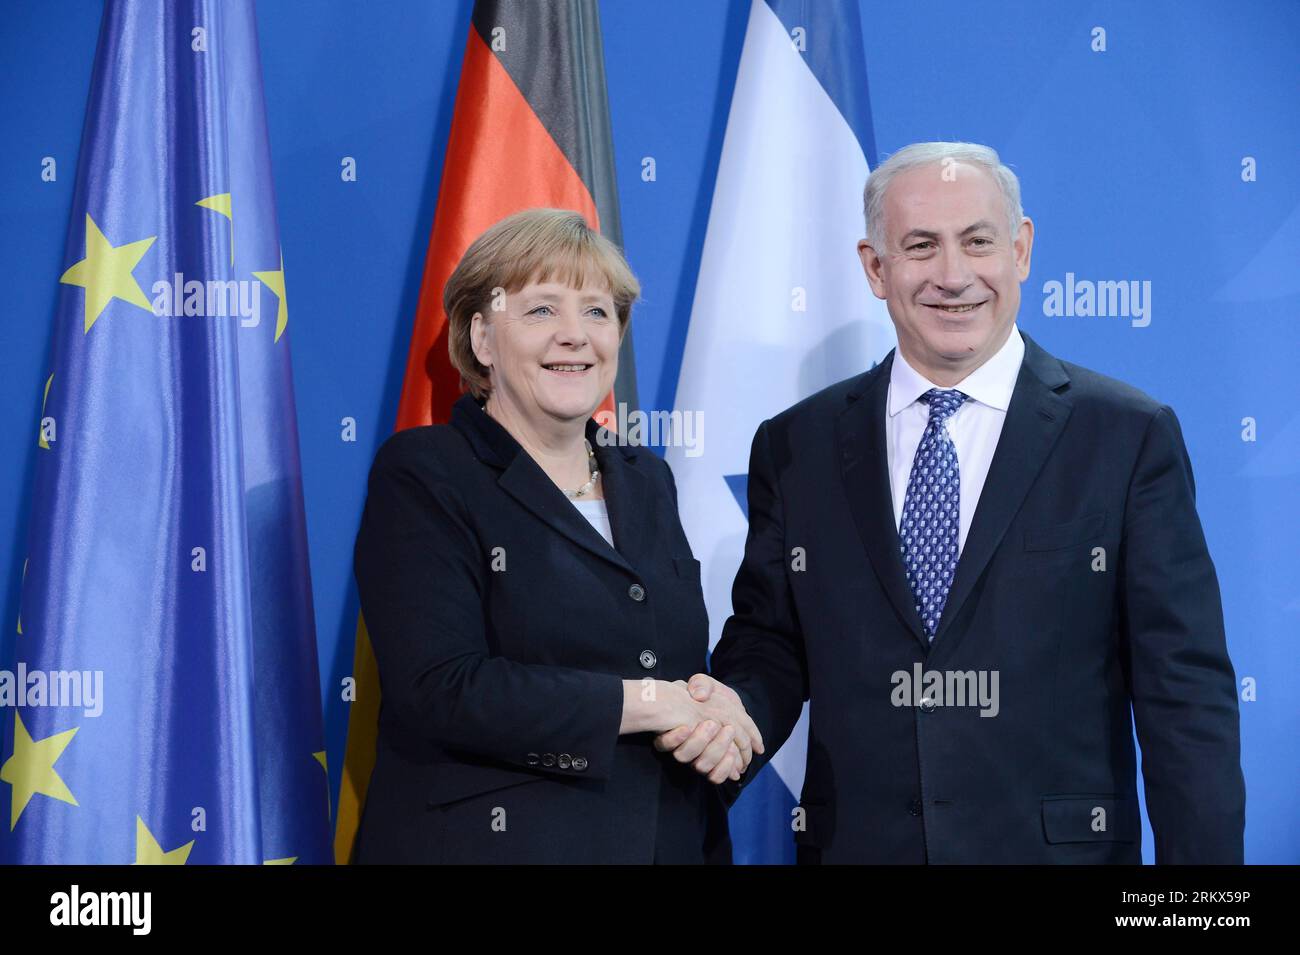 Bildnummer: 58891170  Datum: 06.12.2012  Copyright: imago/Xinhua (121206) -- BERLIN, Dec. 6, 2012 (Xinhua) -- German Chancellor Angela Merkel (L) attends a joint press conference with Israeli Prime Minister Benjamin Netanyahu after their meeting in Berlin, Germany, Dec. 6, 2012. Germany and Israel said on Thursday that their special and strategic relations could hardly be affected by their differences over the new Jewish settlement plans. (Xinhua/Goncalo Silva) GERMANY-ISRAEL-DIPLOMACY-JEWISH SETTLEMENT-PLANS PUBLICATIONxNOTxINxCHN People Politik PK Pressetermin Regierungskonsultation GER Isra Stock Photo